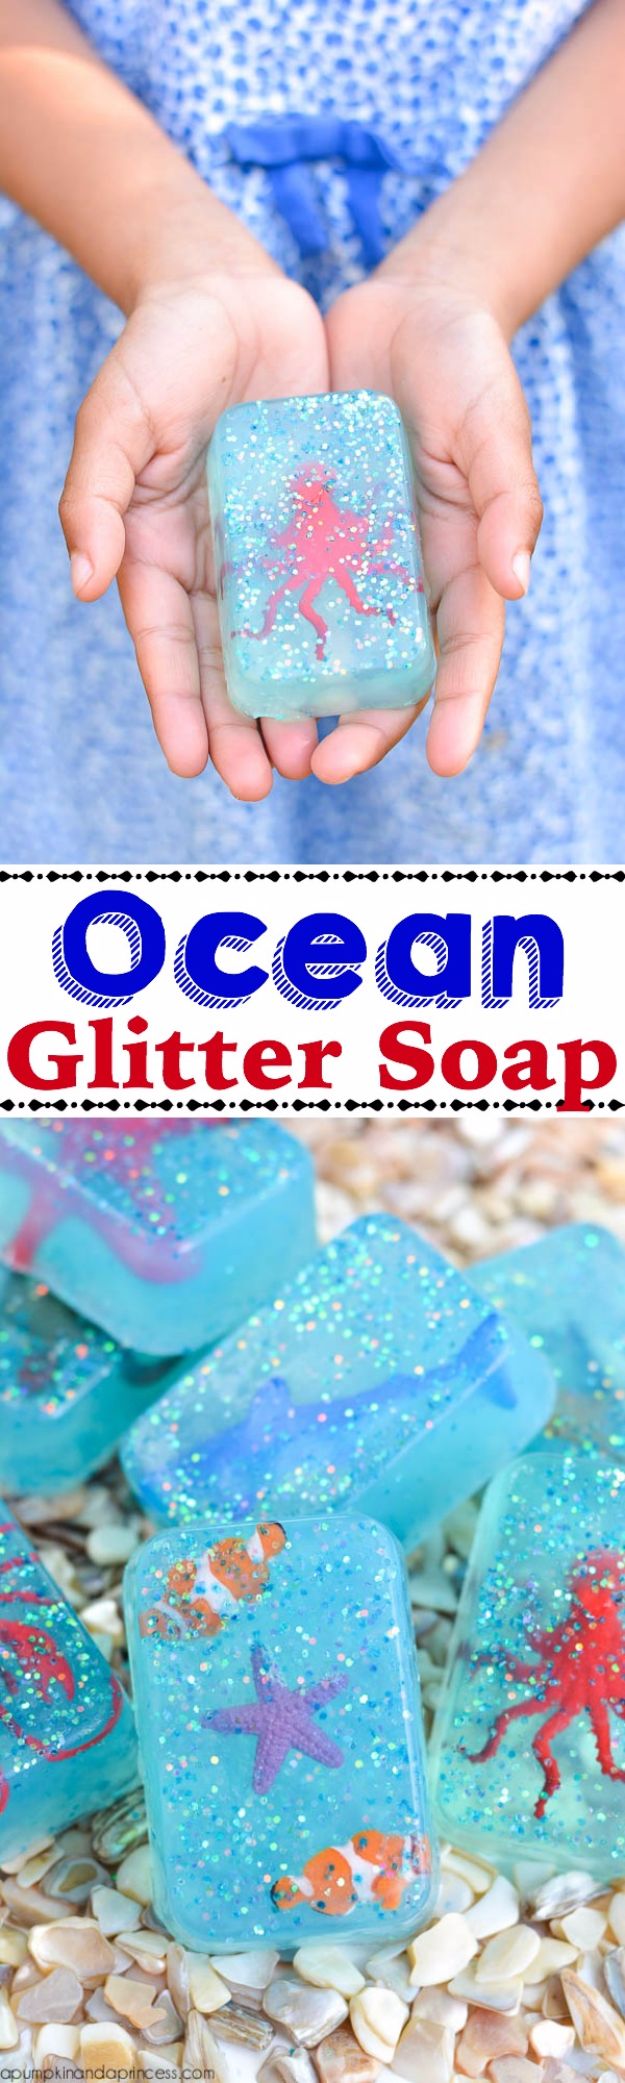 DIY Ideas WIth Glitter - Ocean Glitter Soap - Easy Crafts and Projects for Decoration, Gifts, and Bedroom Decor - How To Make Ombre, Mod Podge and Glitter Mason Jar Gift Ideas For Teens - Easy Clothes and Makeup Crafts For Teenagers #diyideas #glitter #crafts